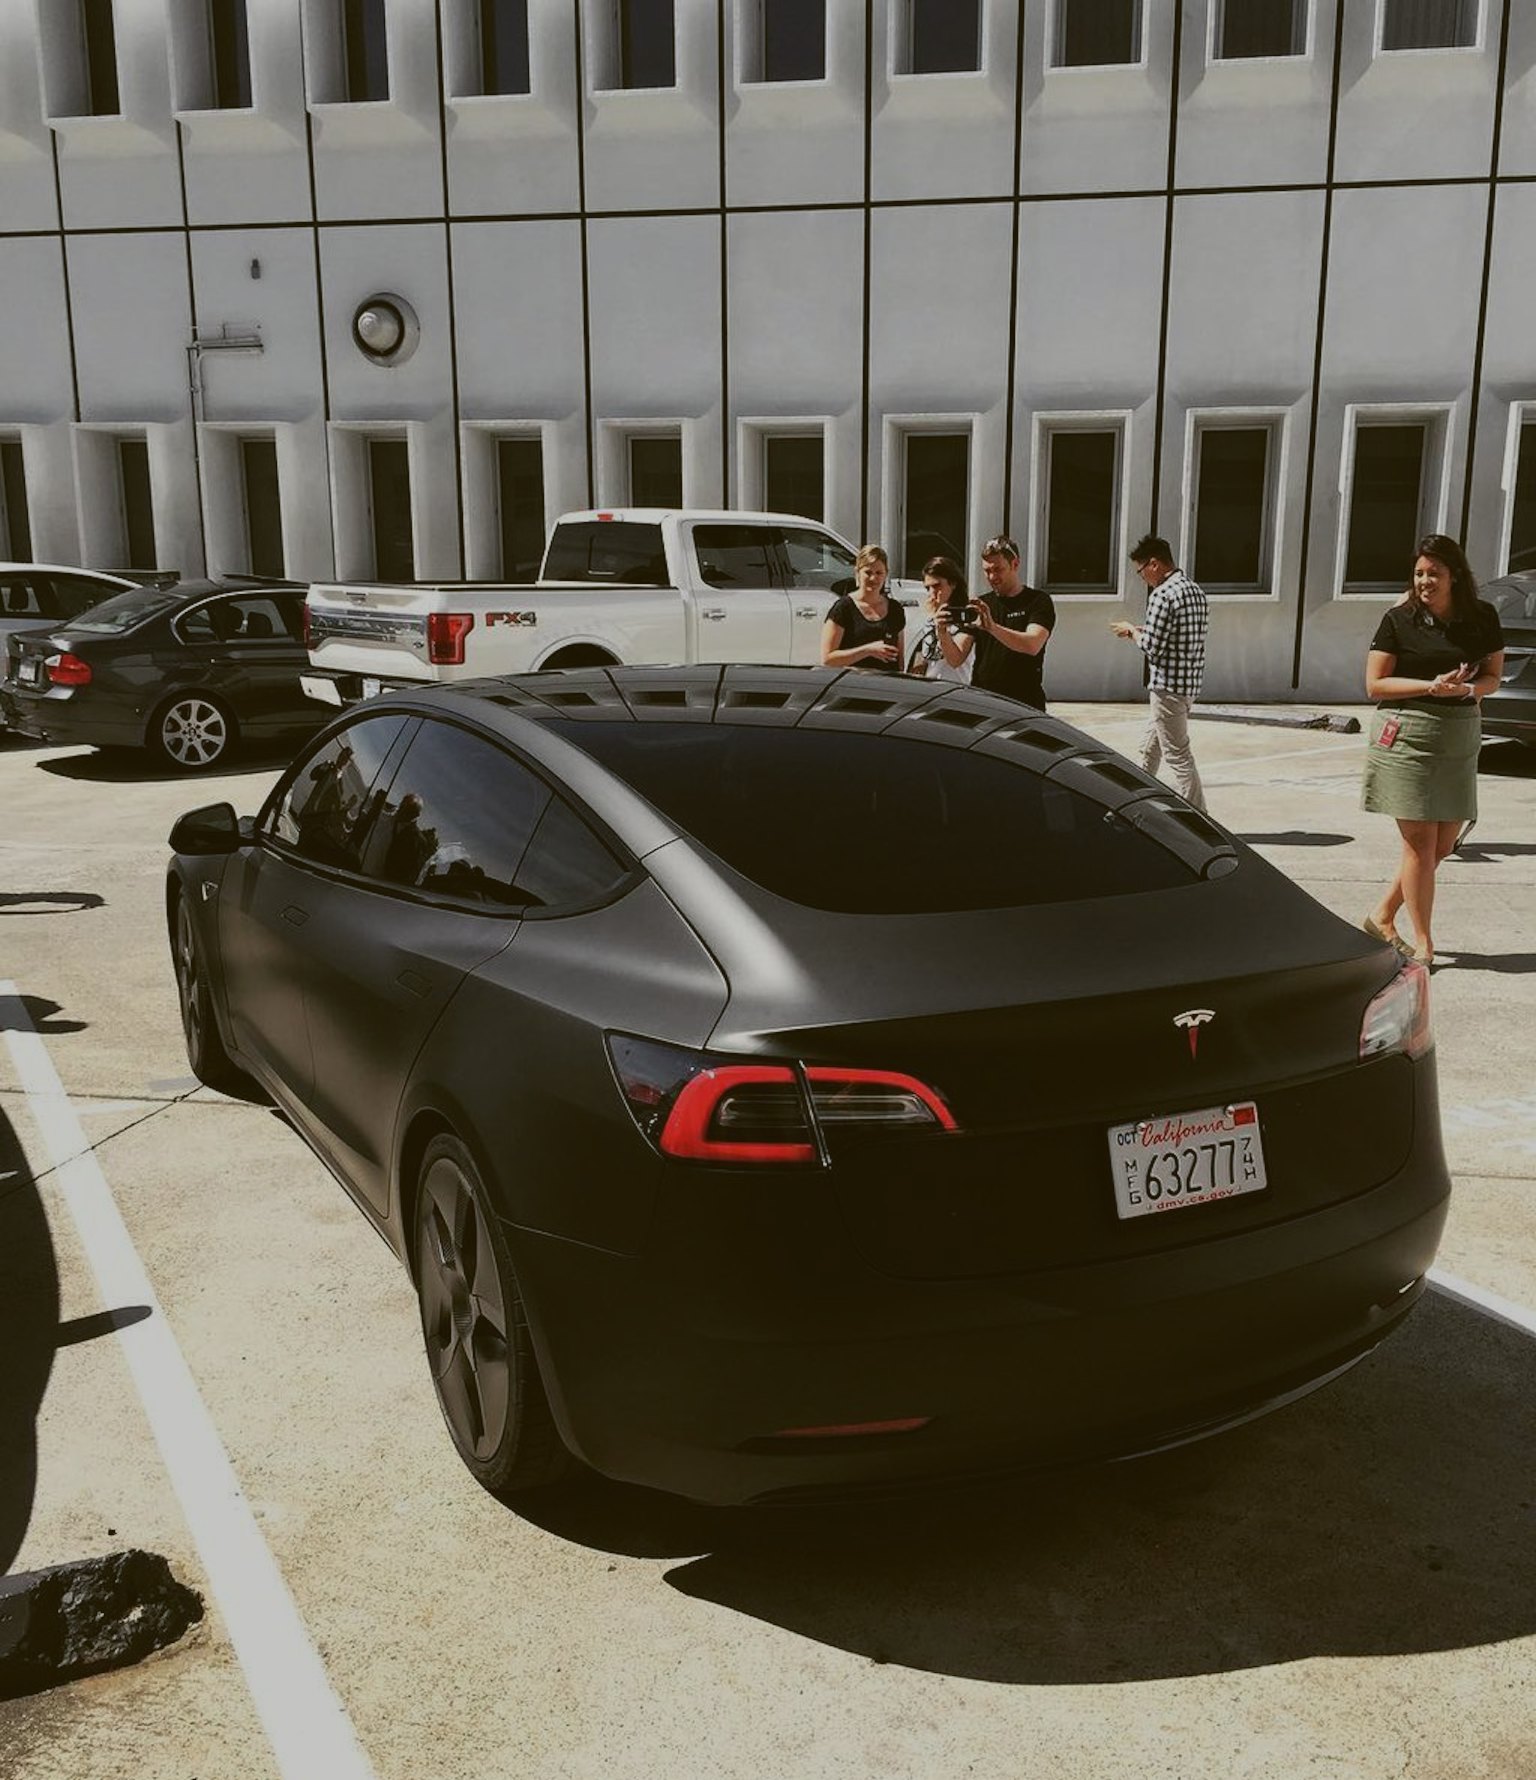 Feast Your Eyes on a Murdered-Out Tesla Model 3 Prowling California Streets